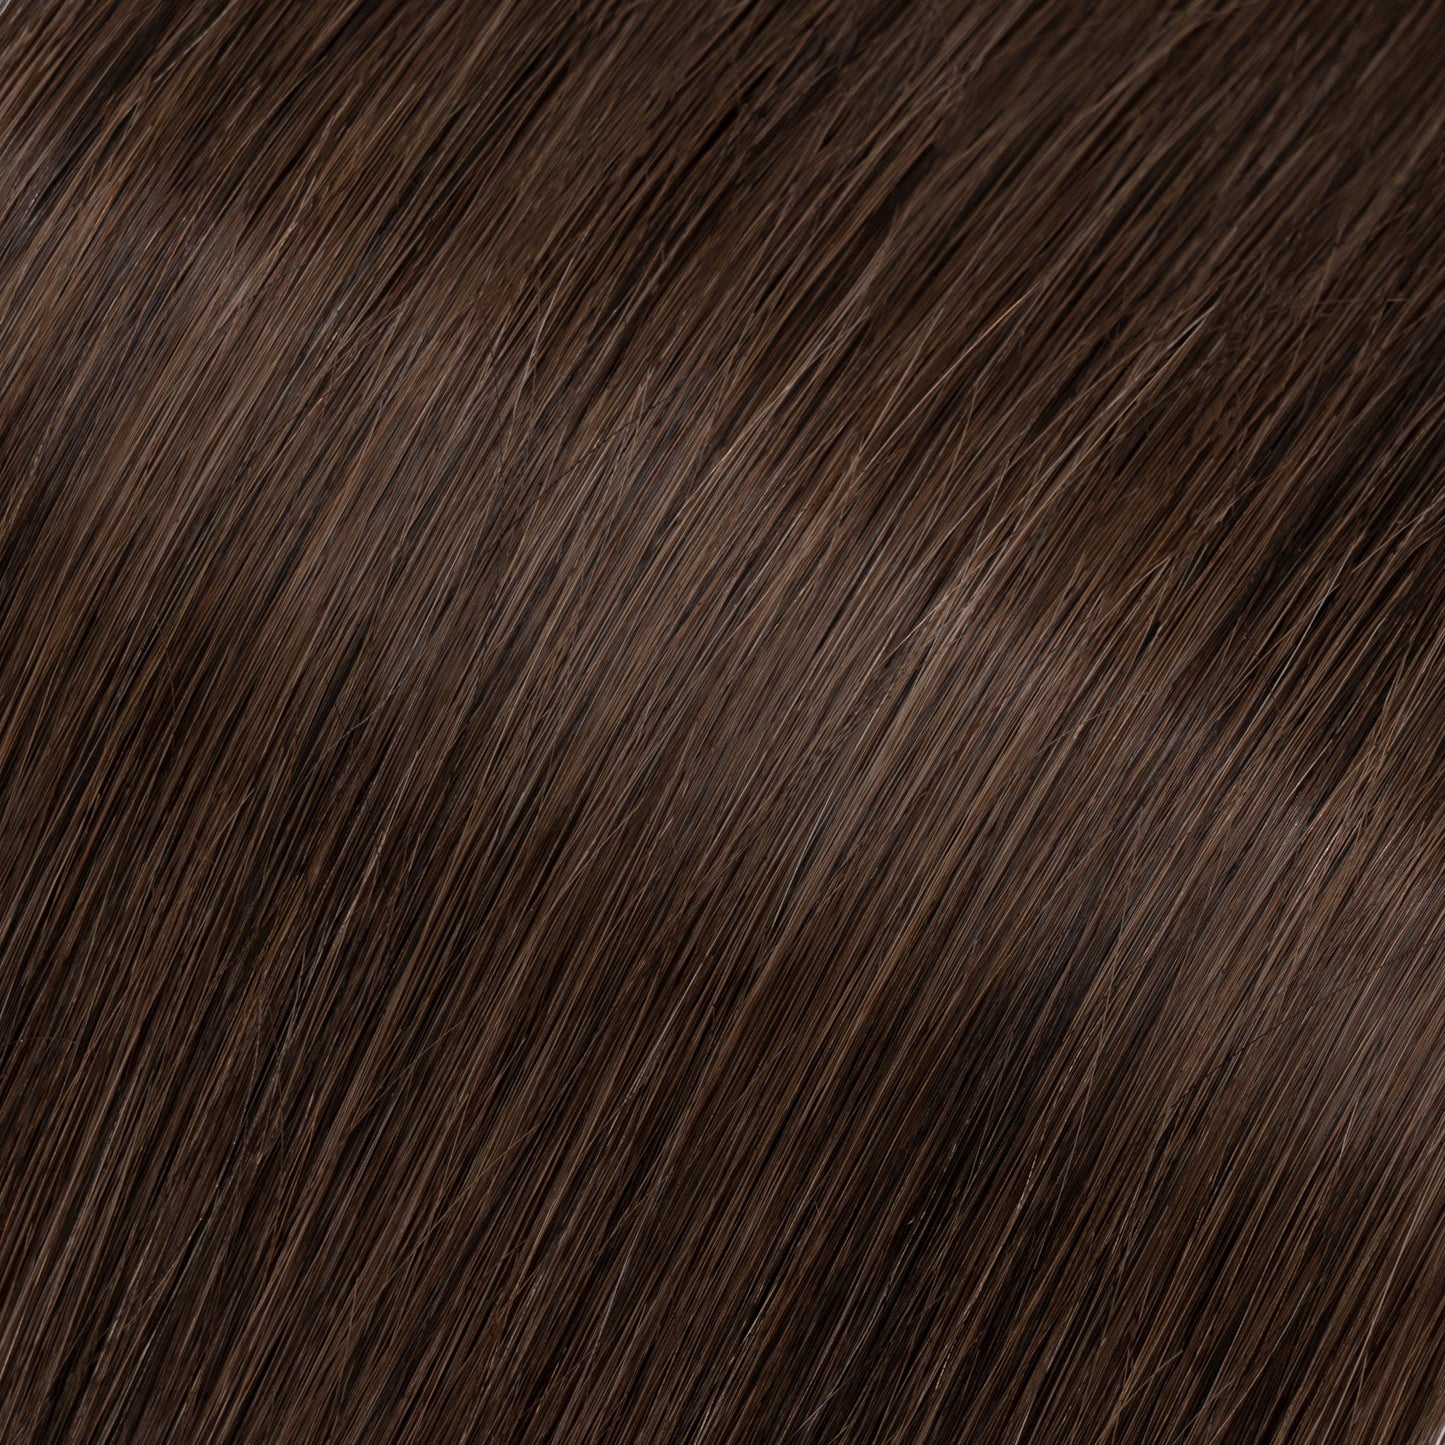 Lightweight Medium Brown Tape In Hair Extensions Invisible Weft 20 PCS segohair.com